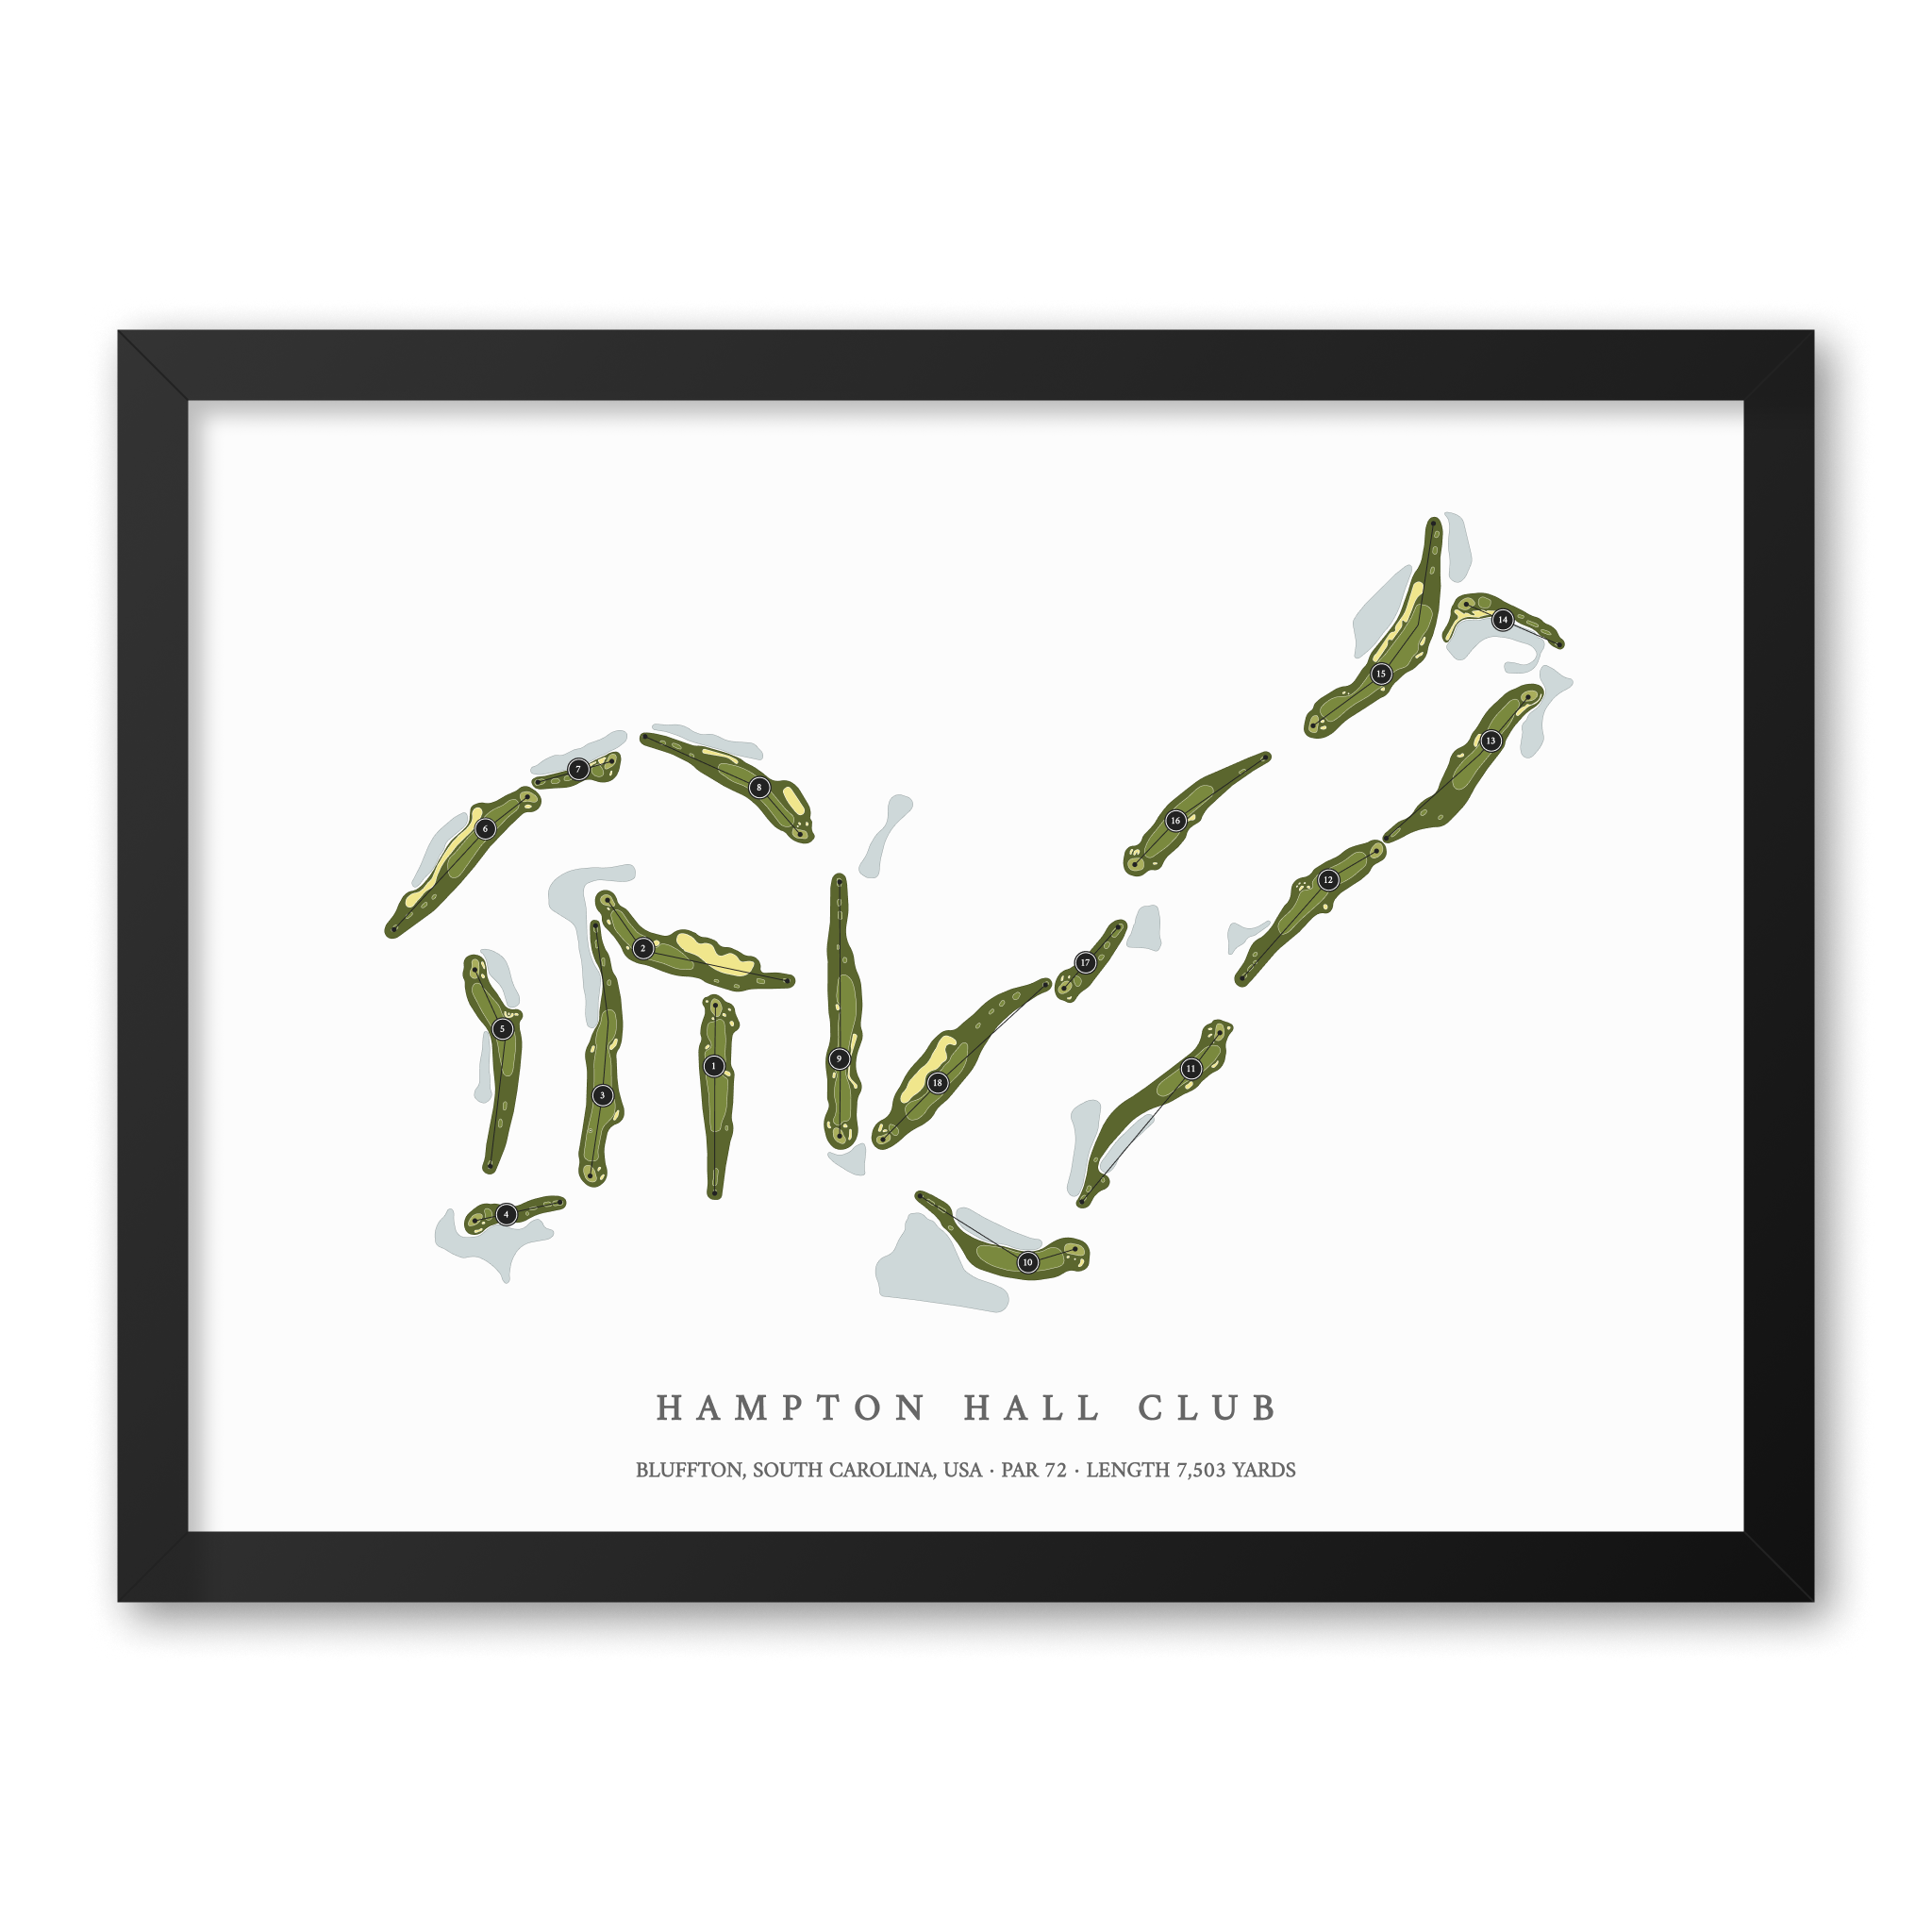 Hampton Hall Club| Golf Course Print | Black Frame With Hole Numbers #hole numbers_yes